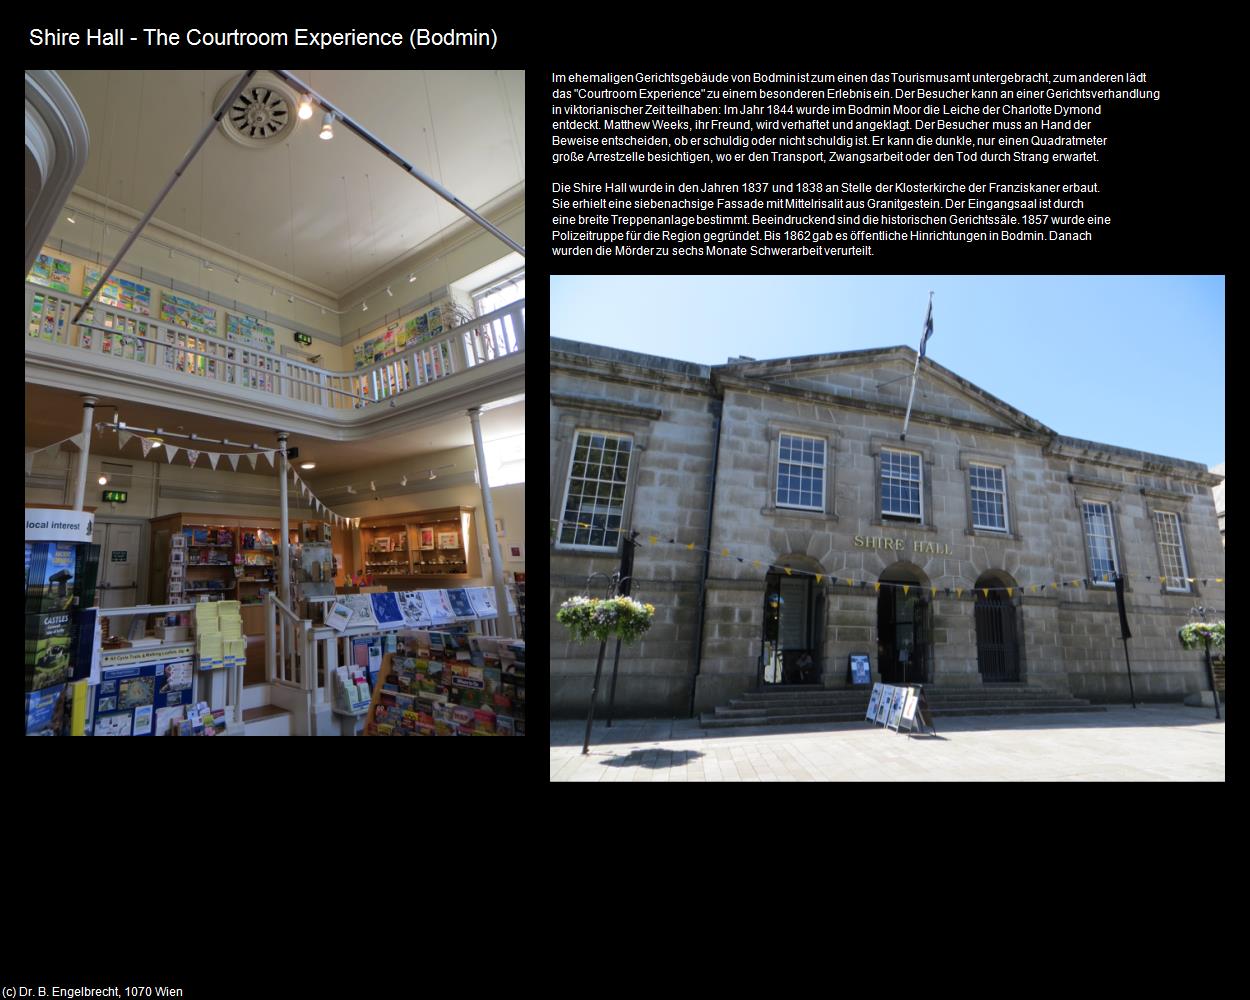 Shire Hall - The Courtroom Experience (Bodmin, England) in Kulturatlas-ENGLAND und WALES